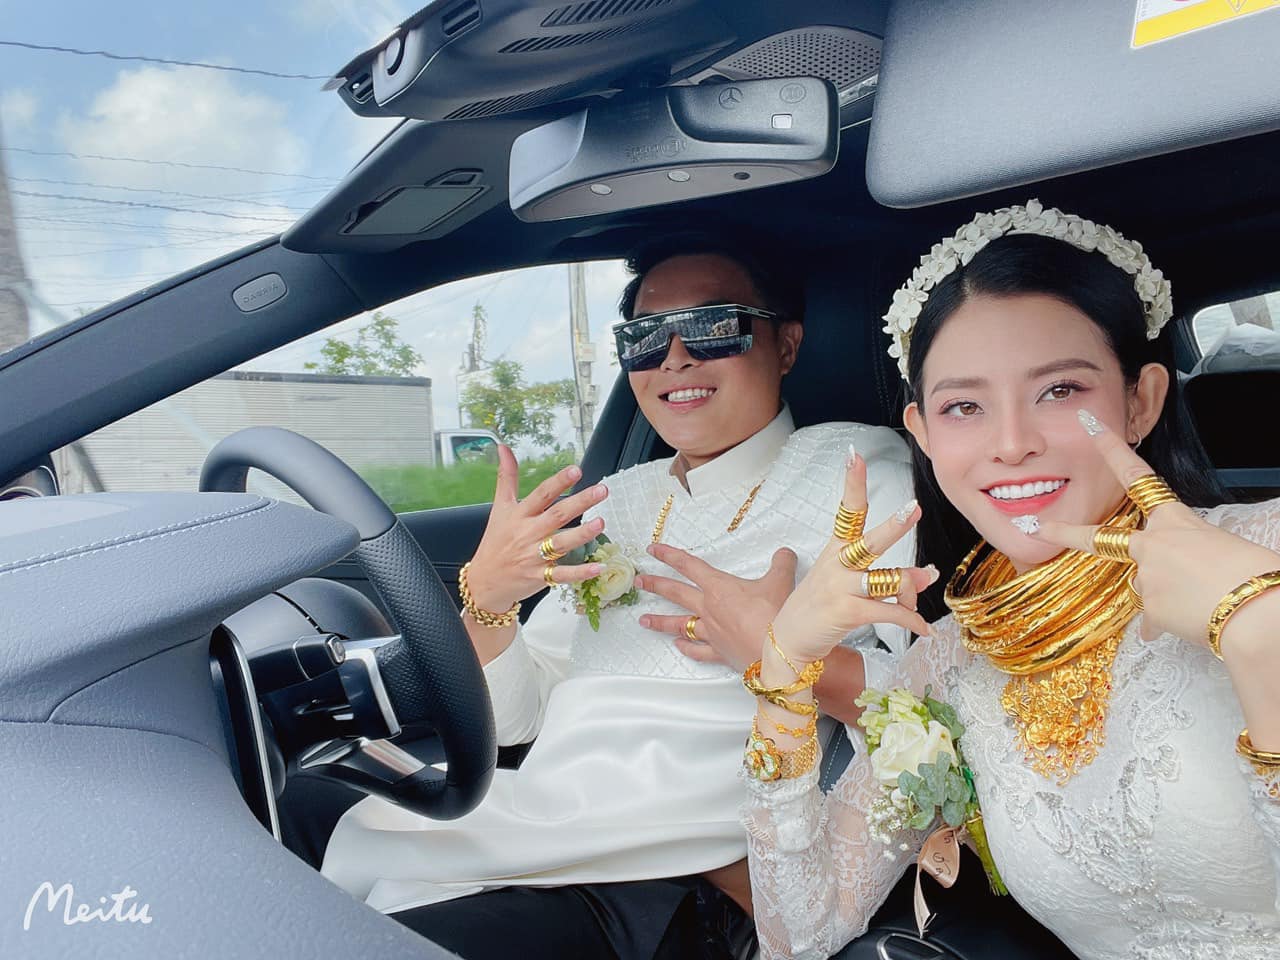 The bride received 30 gold trees on the wedding day, wearing a full face to attract attention: The mother-in-law gave her daughter-in-law a billion-dollar Mercedes car, the grandmother U80 